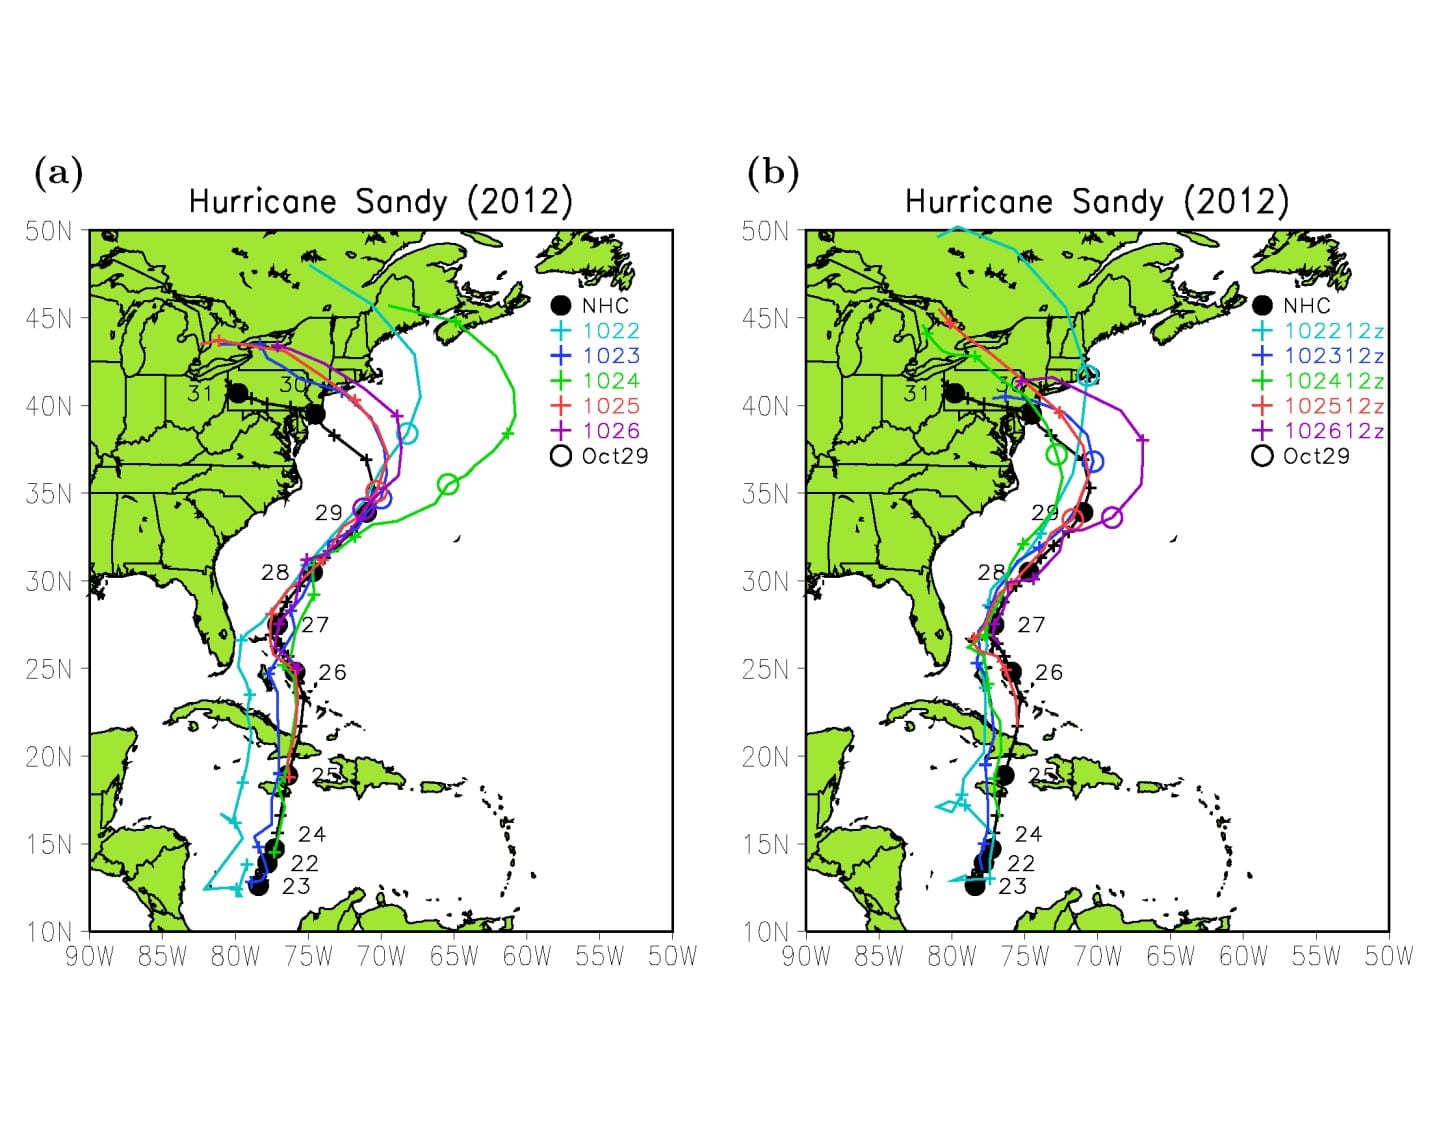 Figure 1: Ten consecutive 5-8 day track predictions of Hurricane Sandy. Panels (a) and (b) show the results initialized at 00Z and 12Z on different days. Colored lines represent model forecasts, while the black line indicates the locations of the best track. The light blue, blue, green, red and purple lines represent the forecasts starting from Oct. 22, 23, 24, 25 and 26, respectively. An open circle with the same color scheme indicates the predicted location of Sandy at 00Z Oct. 29 from the corresponding run. Image Credit: B. Shen